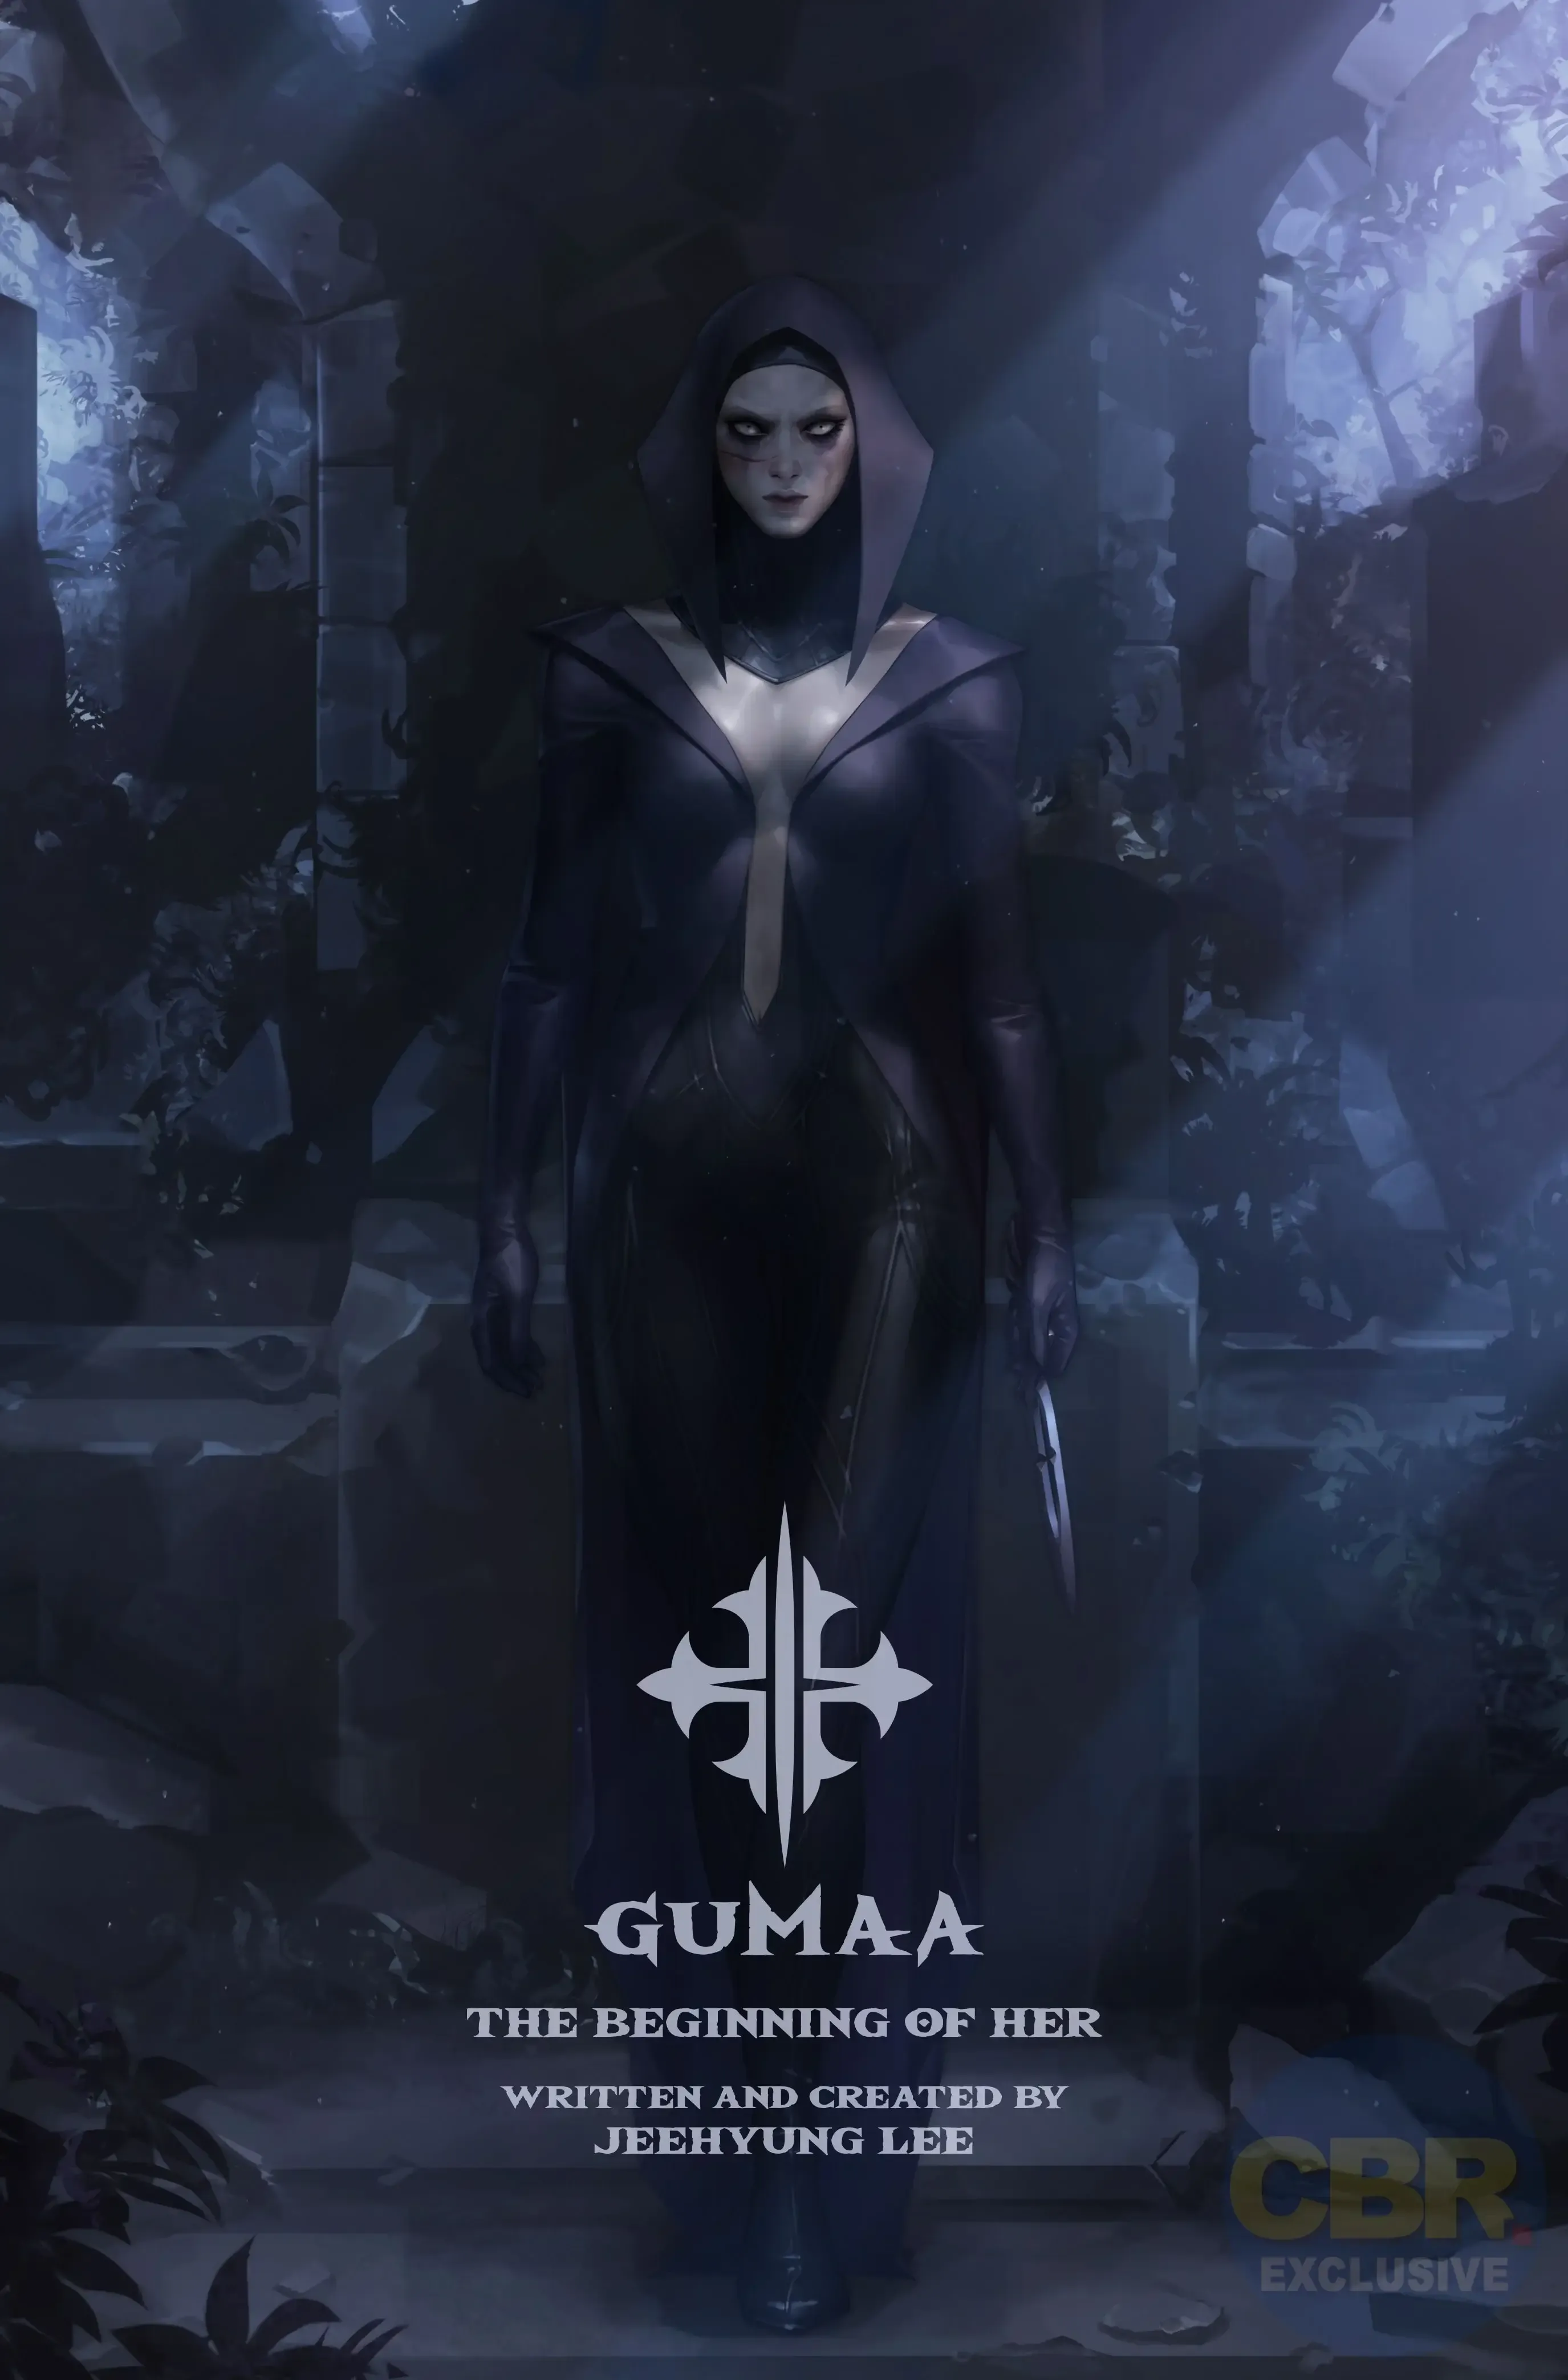 EXCLUSIVE: Jeehyung Lee's Gumaa Features Demons, Nuns And A Peach Momoko Variant 